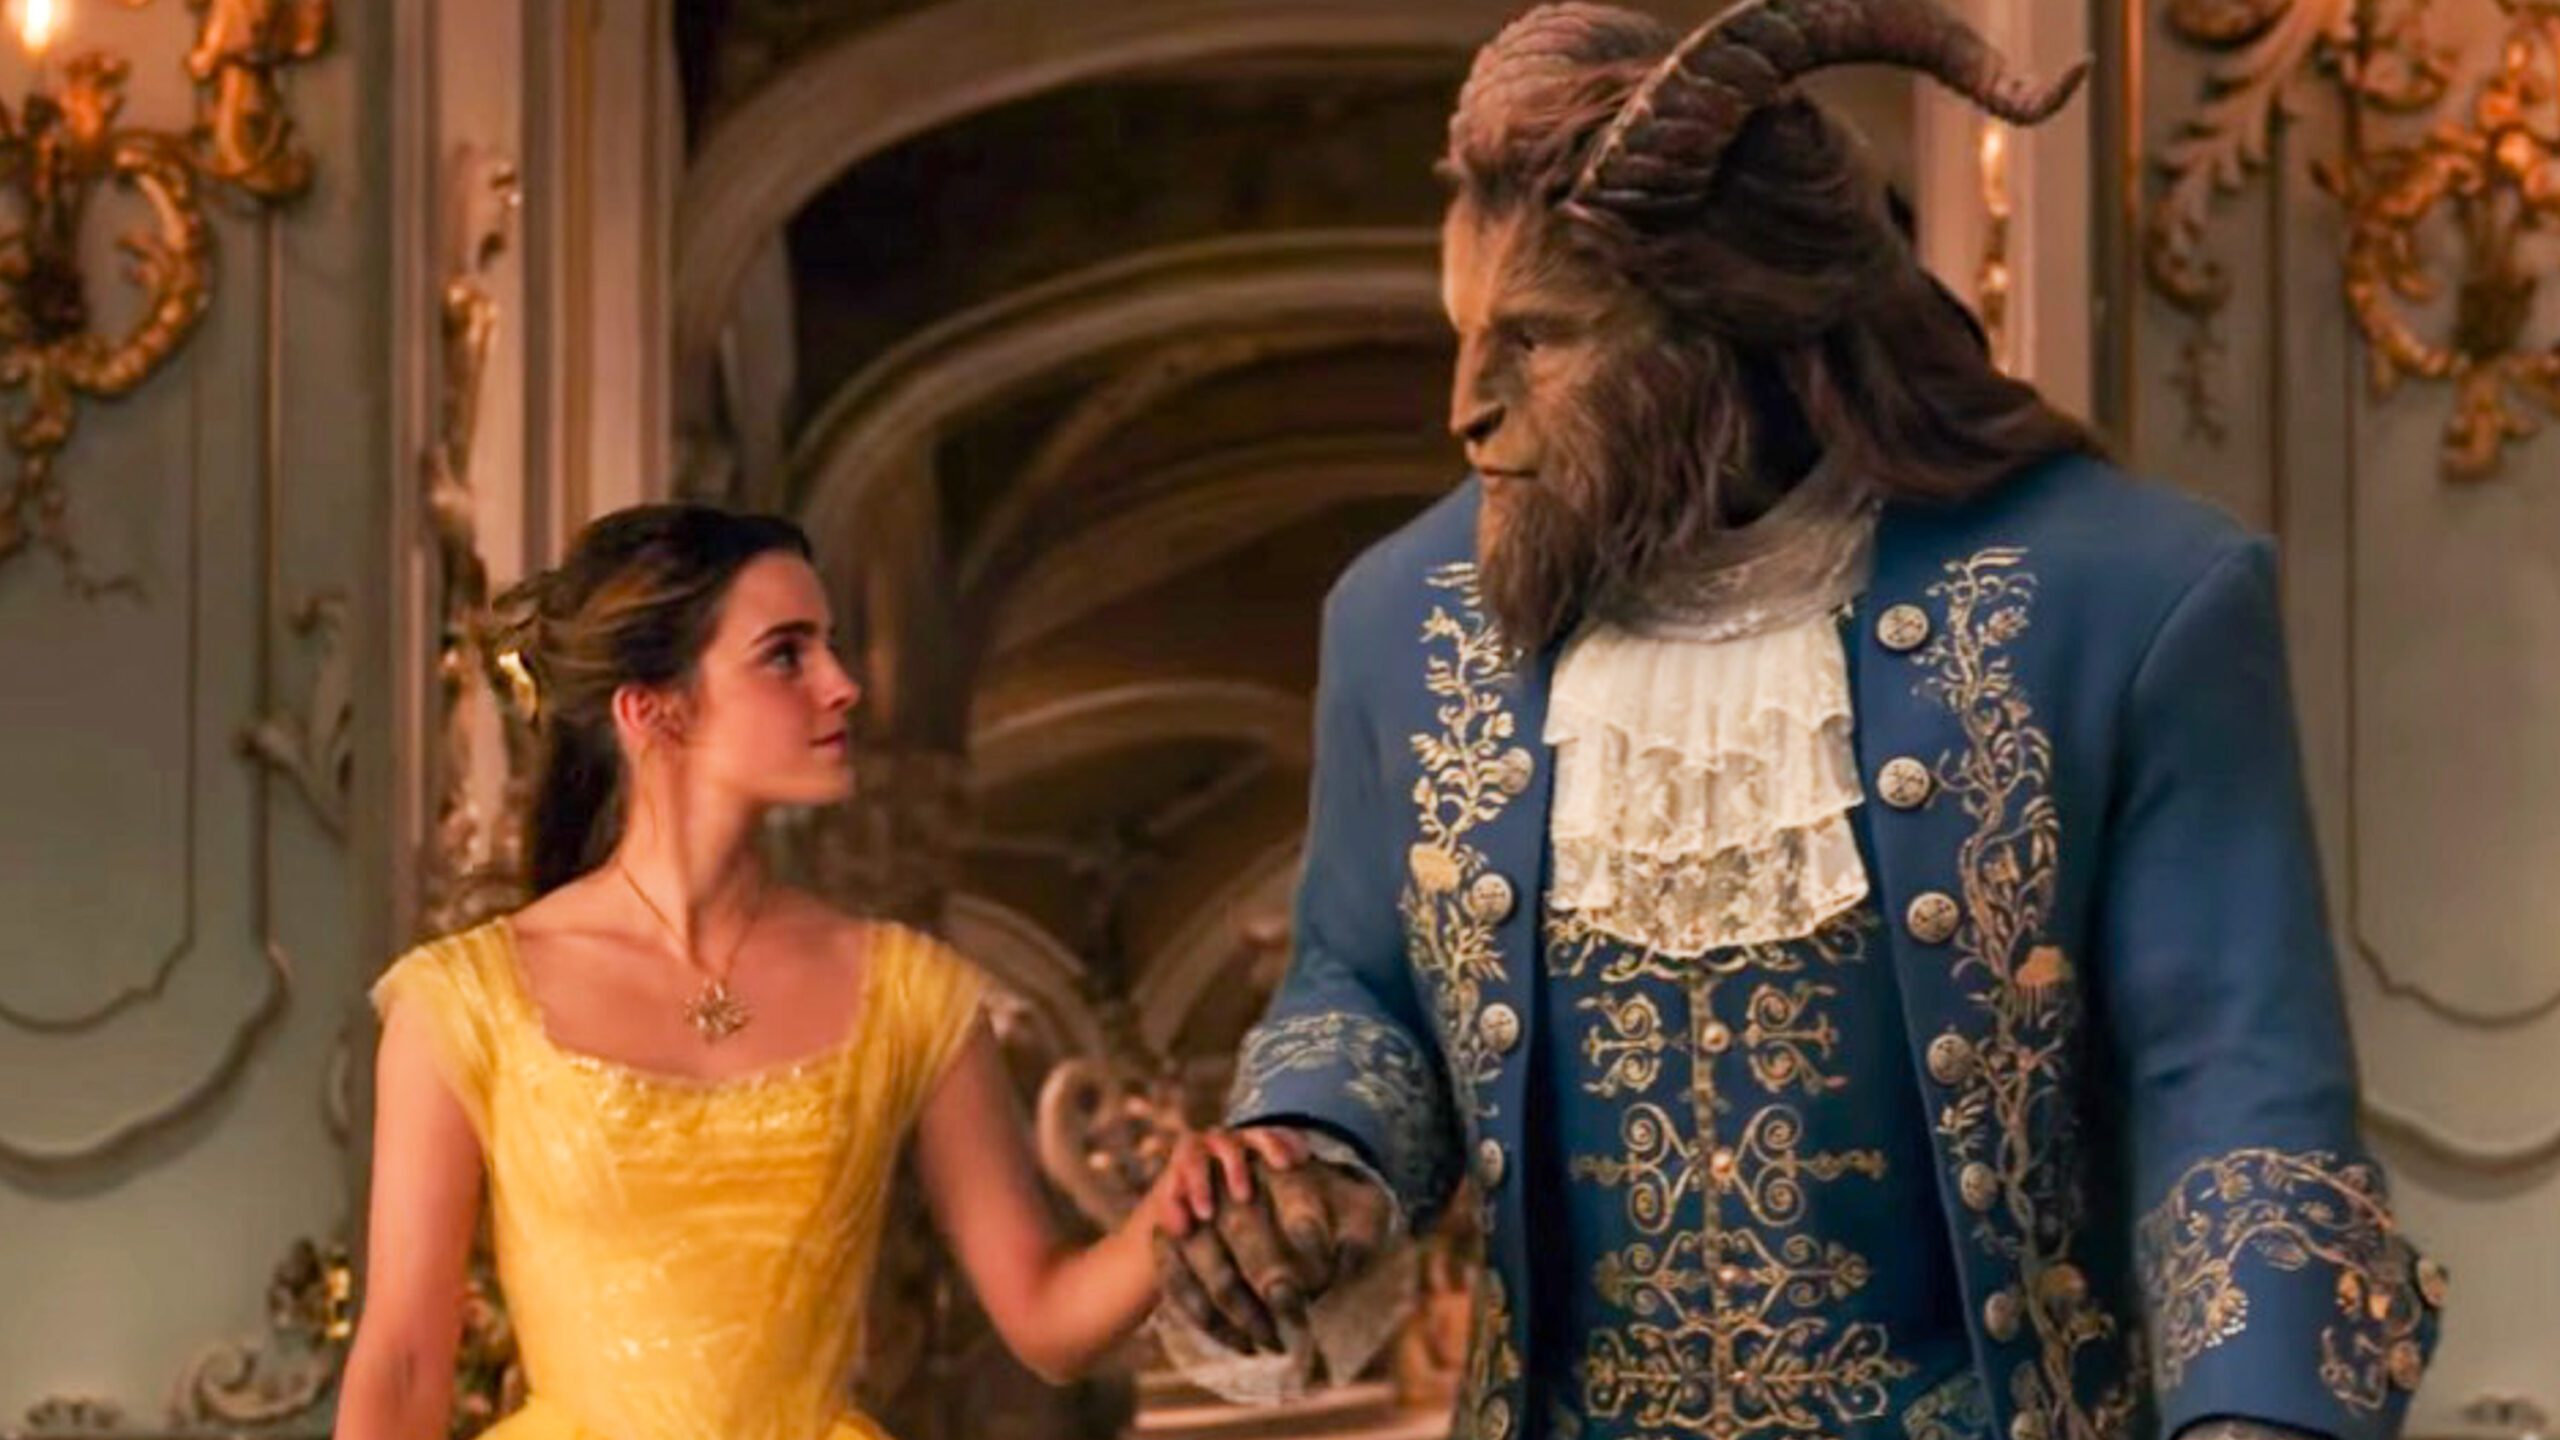 ‘Beauty and the Beast’ review: Pretty but redundant